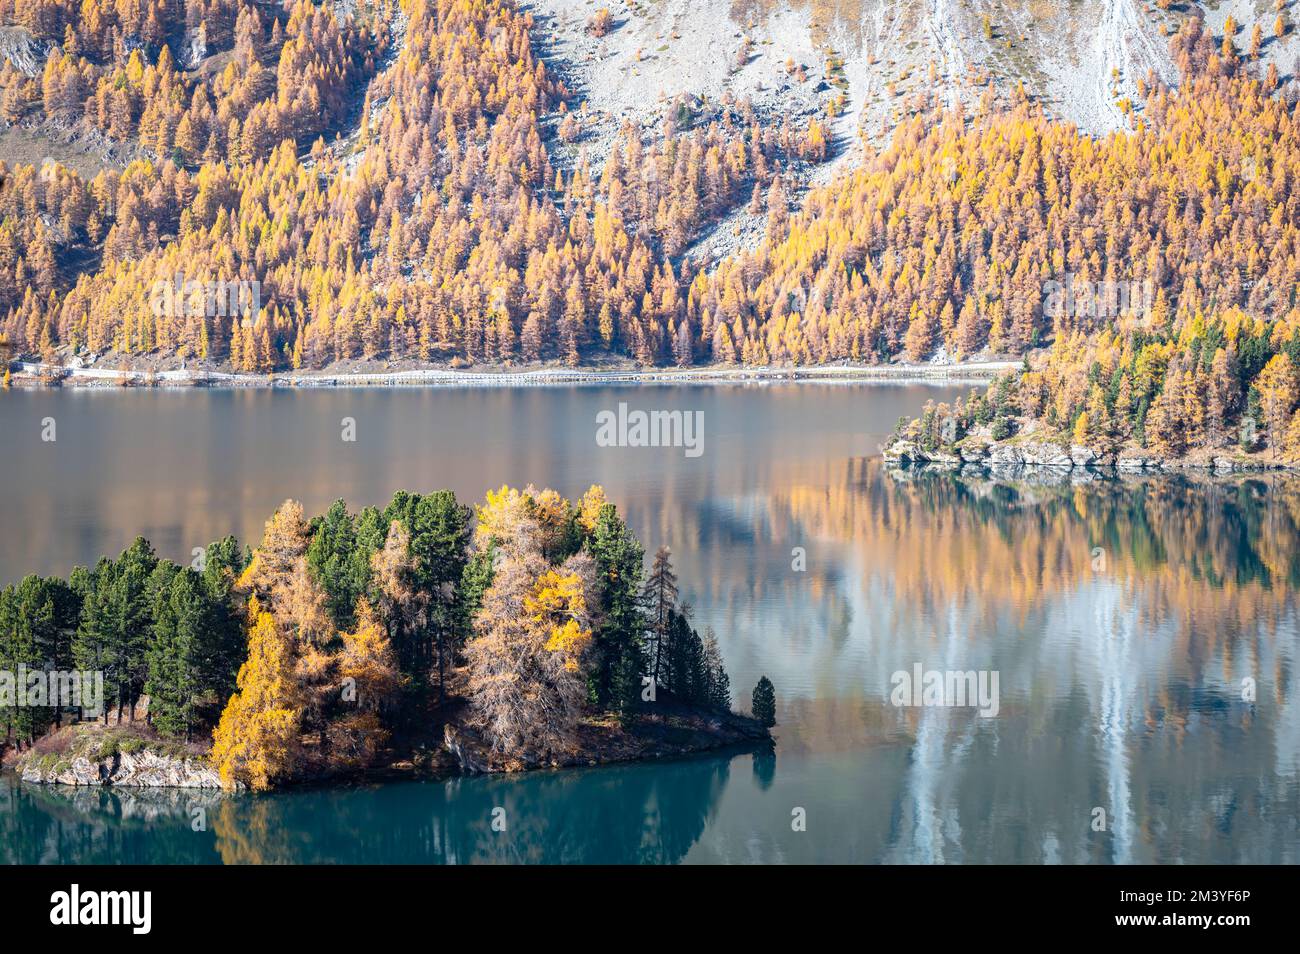 Sils Lake (Lej da Segl) with golden larch trees in October. A lake in Engadin Valley, Switzerland. Stock Photo